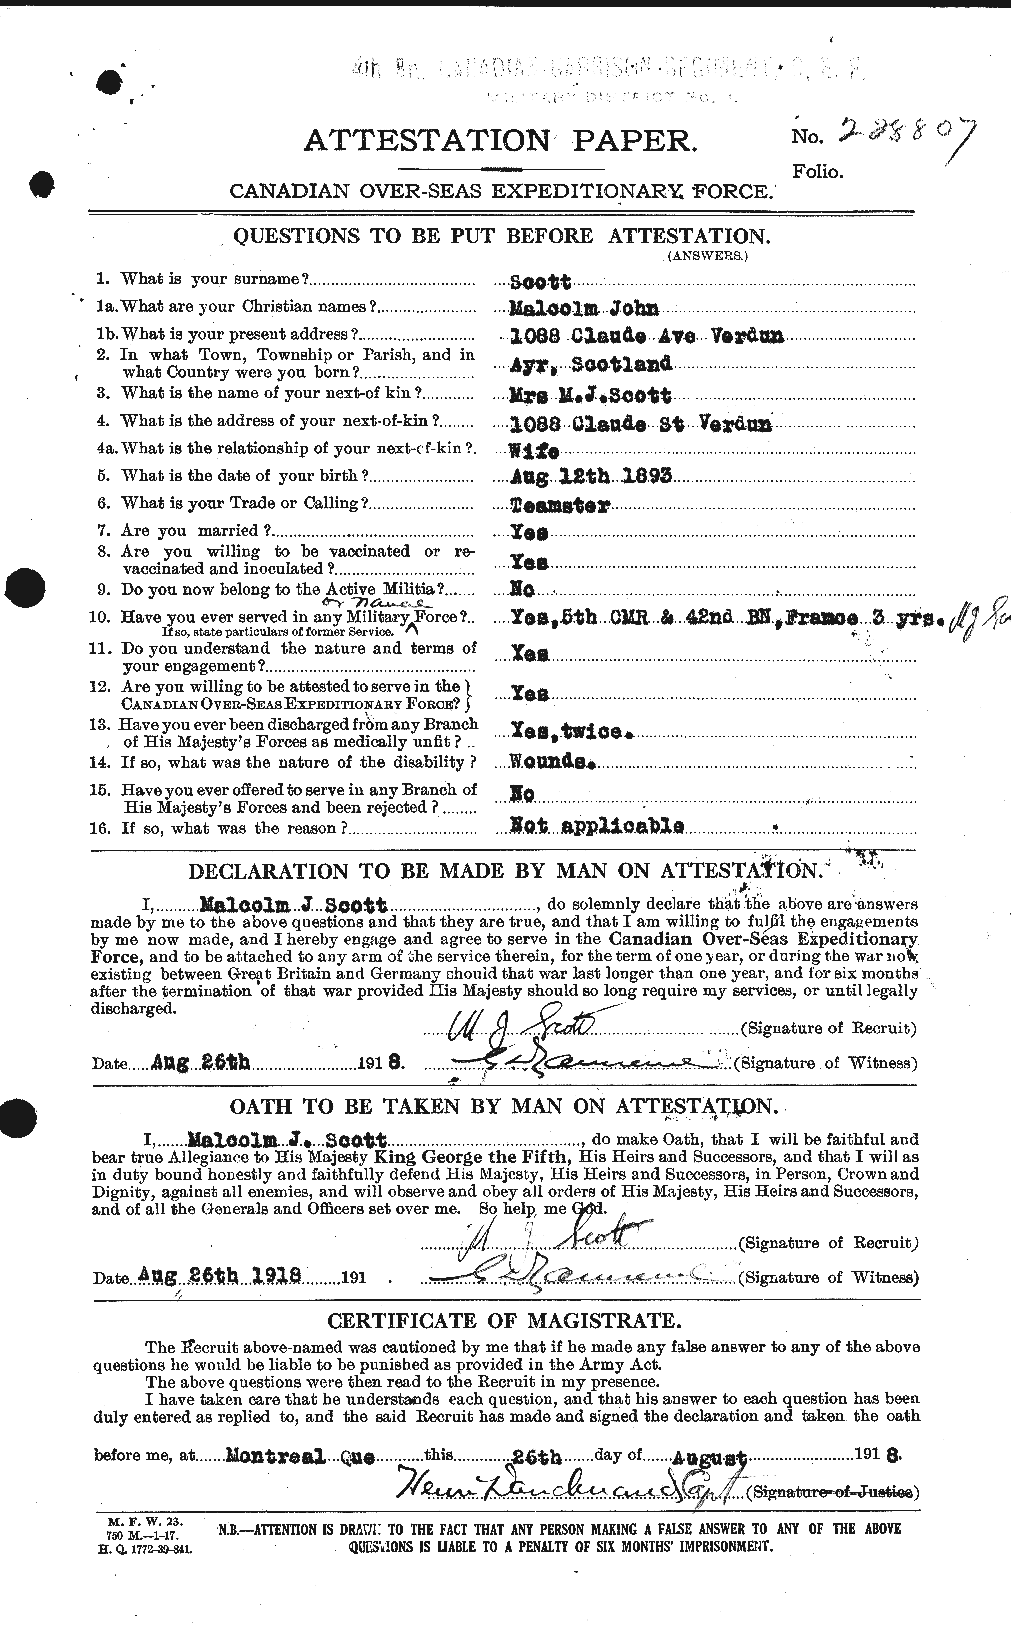 Personnel Records of the First World War - CEF 083514a